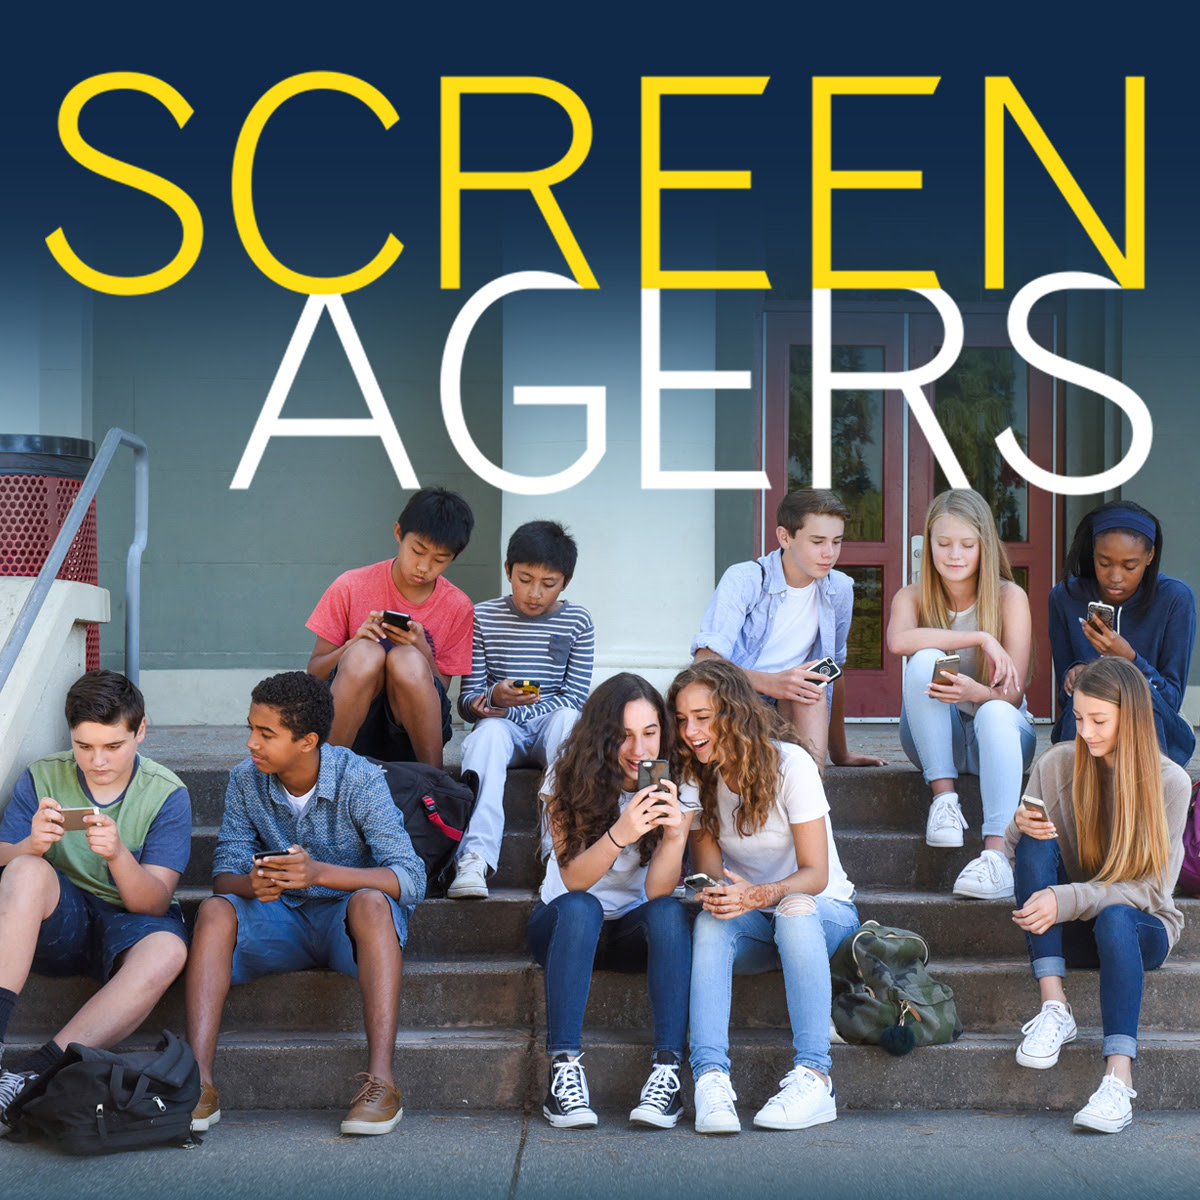 Screenagers Film Presented By St. Matthew Lutheran Church